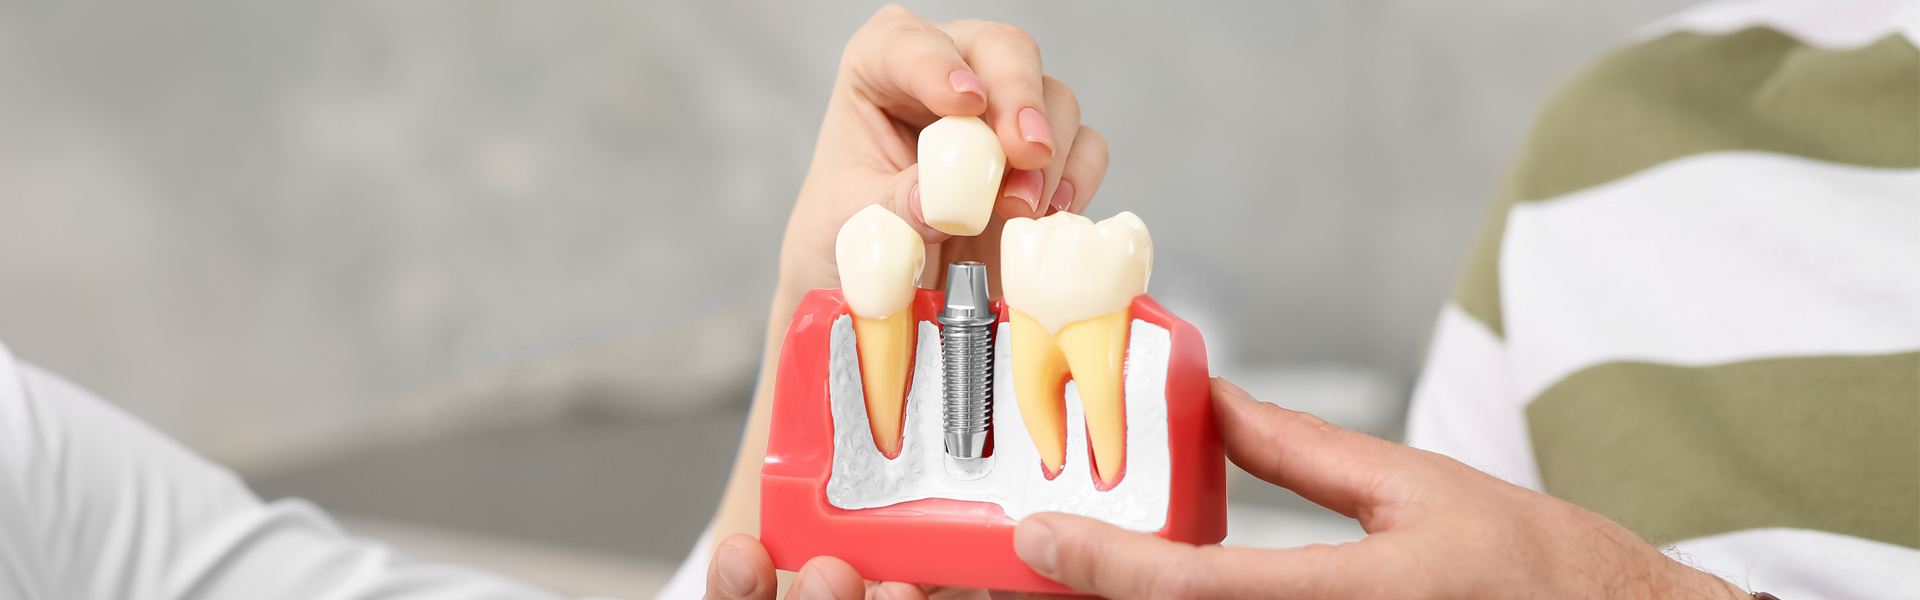 What Are the Benefits of Choosing a Dental Implant Over a Traditional Fixed Bridge?